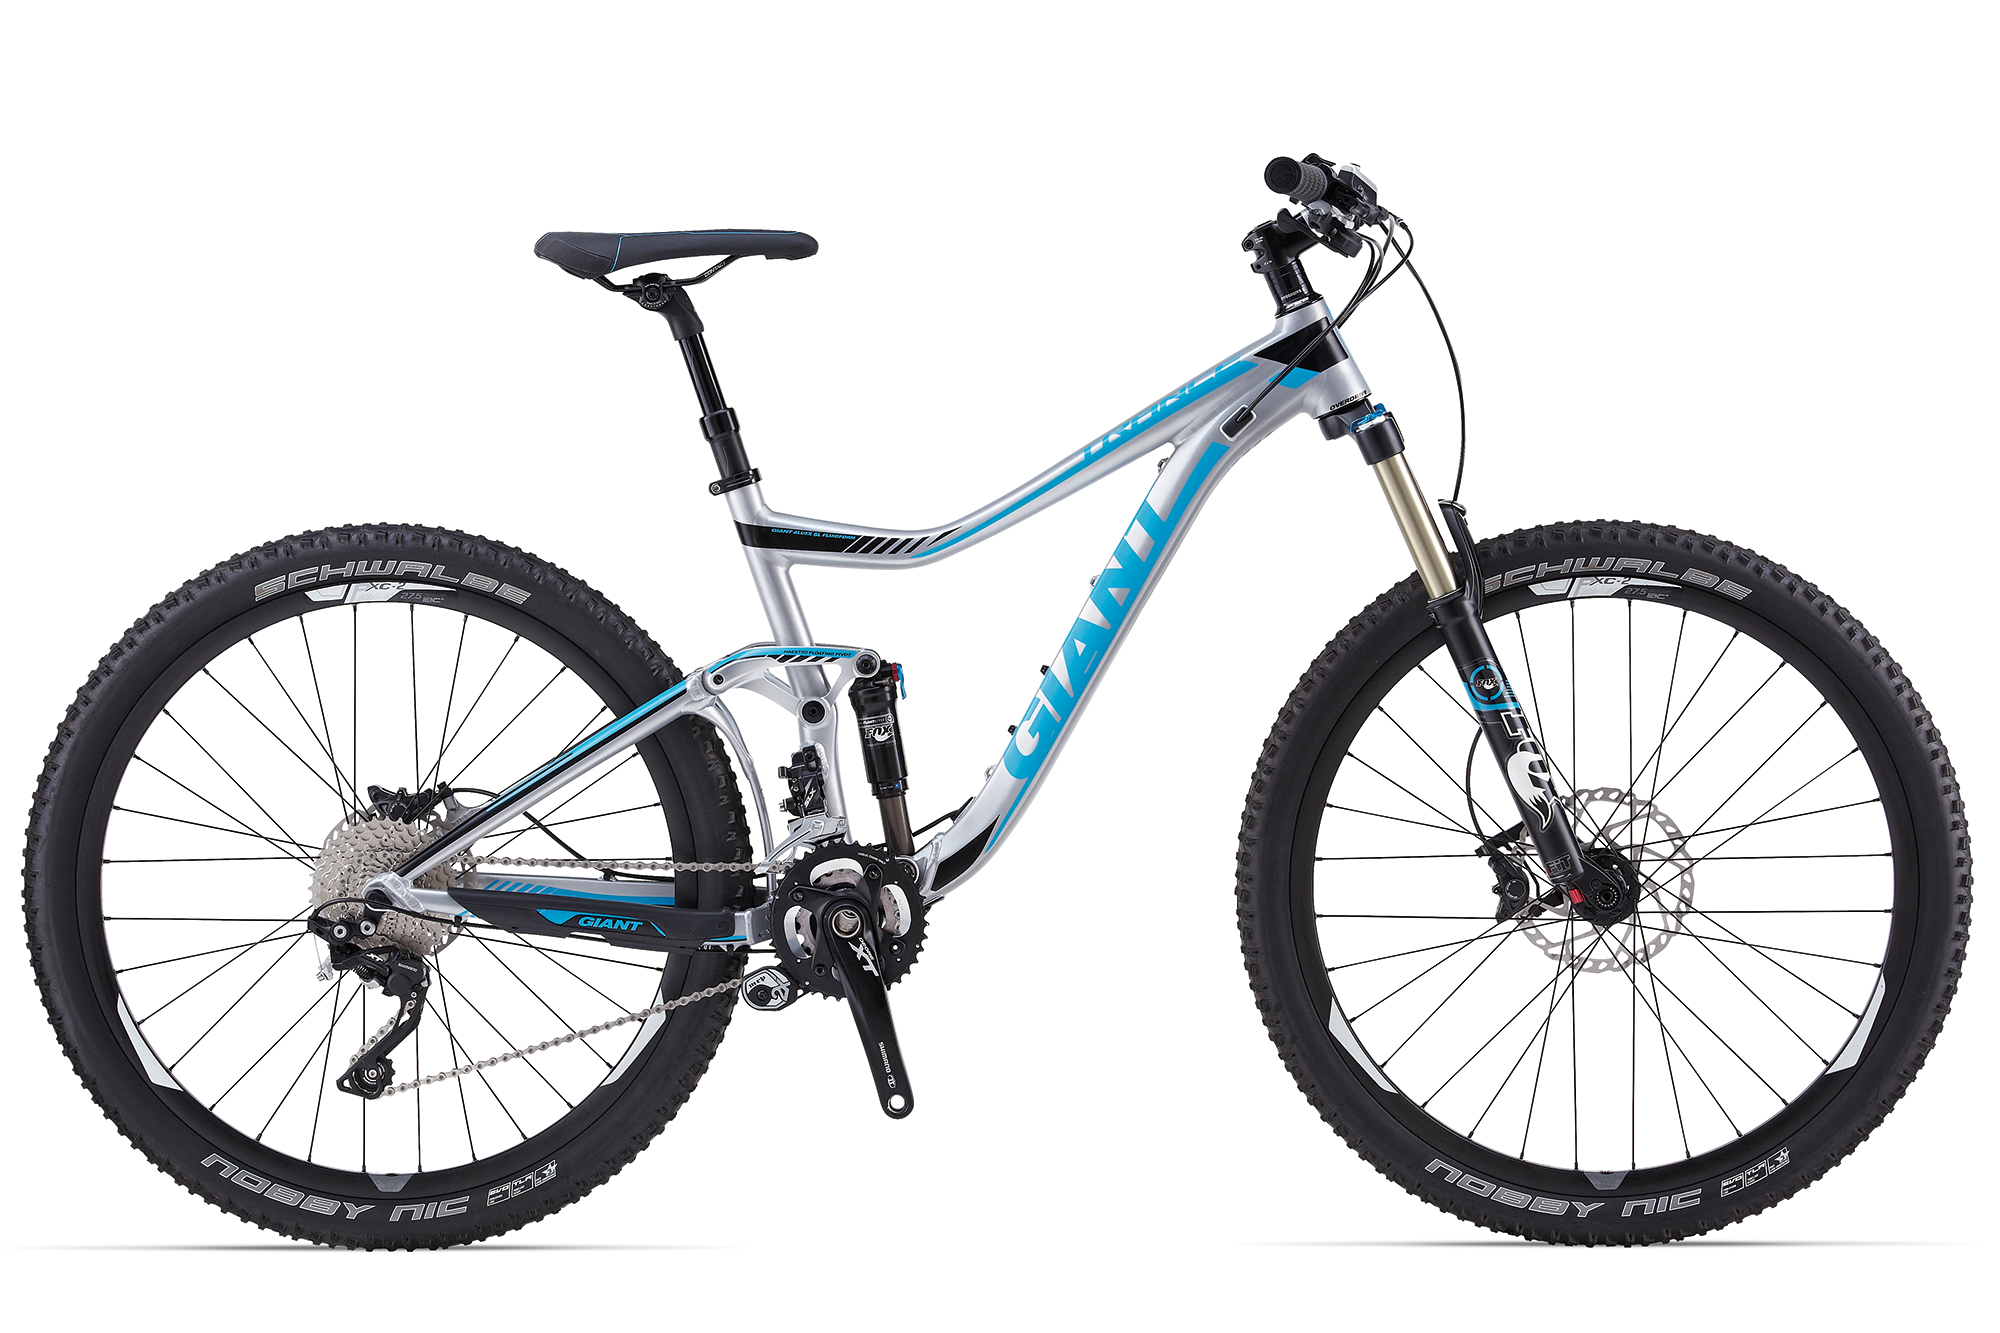 14 Giant Trance 27 5 1 Bicycle Details Bicyclebluebook Com